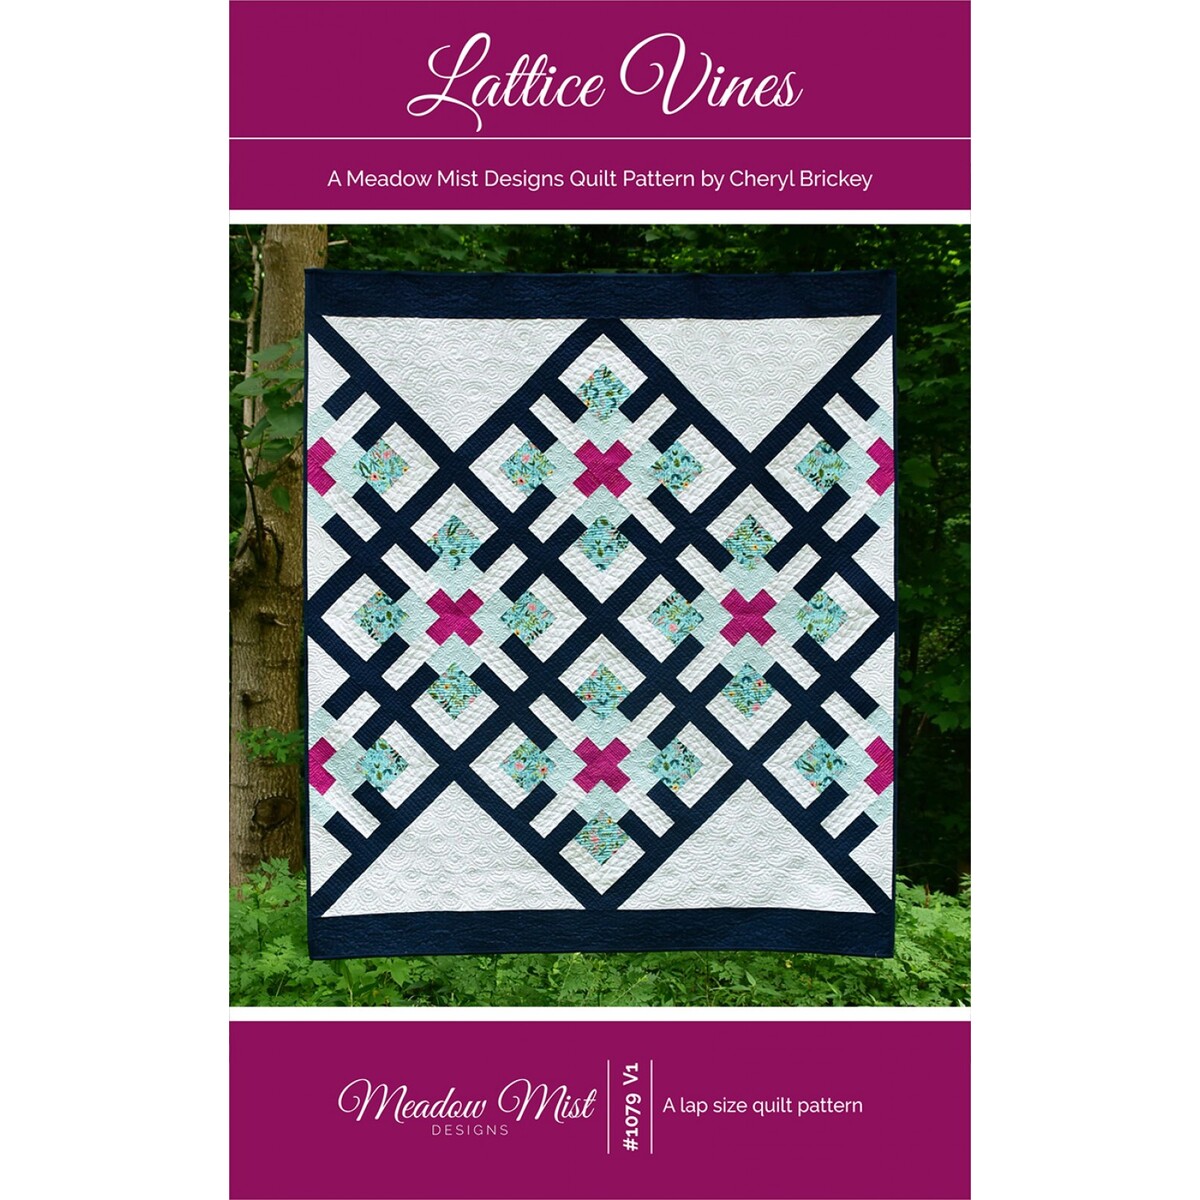 Meadow Mist Designs: Square in a Square Paper Piecing Templates